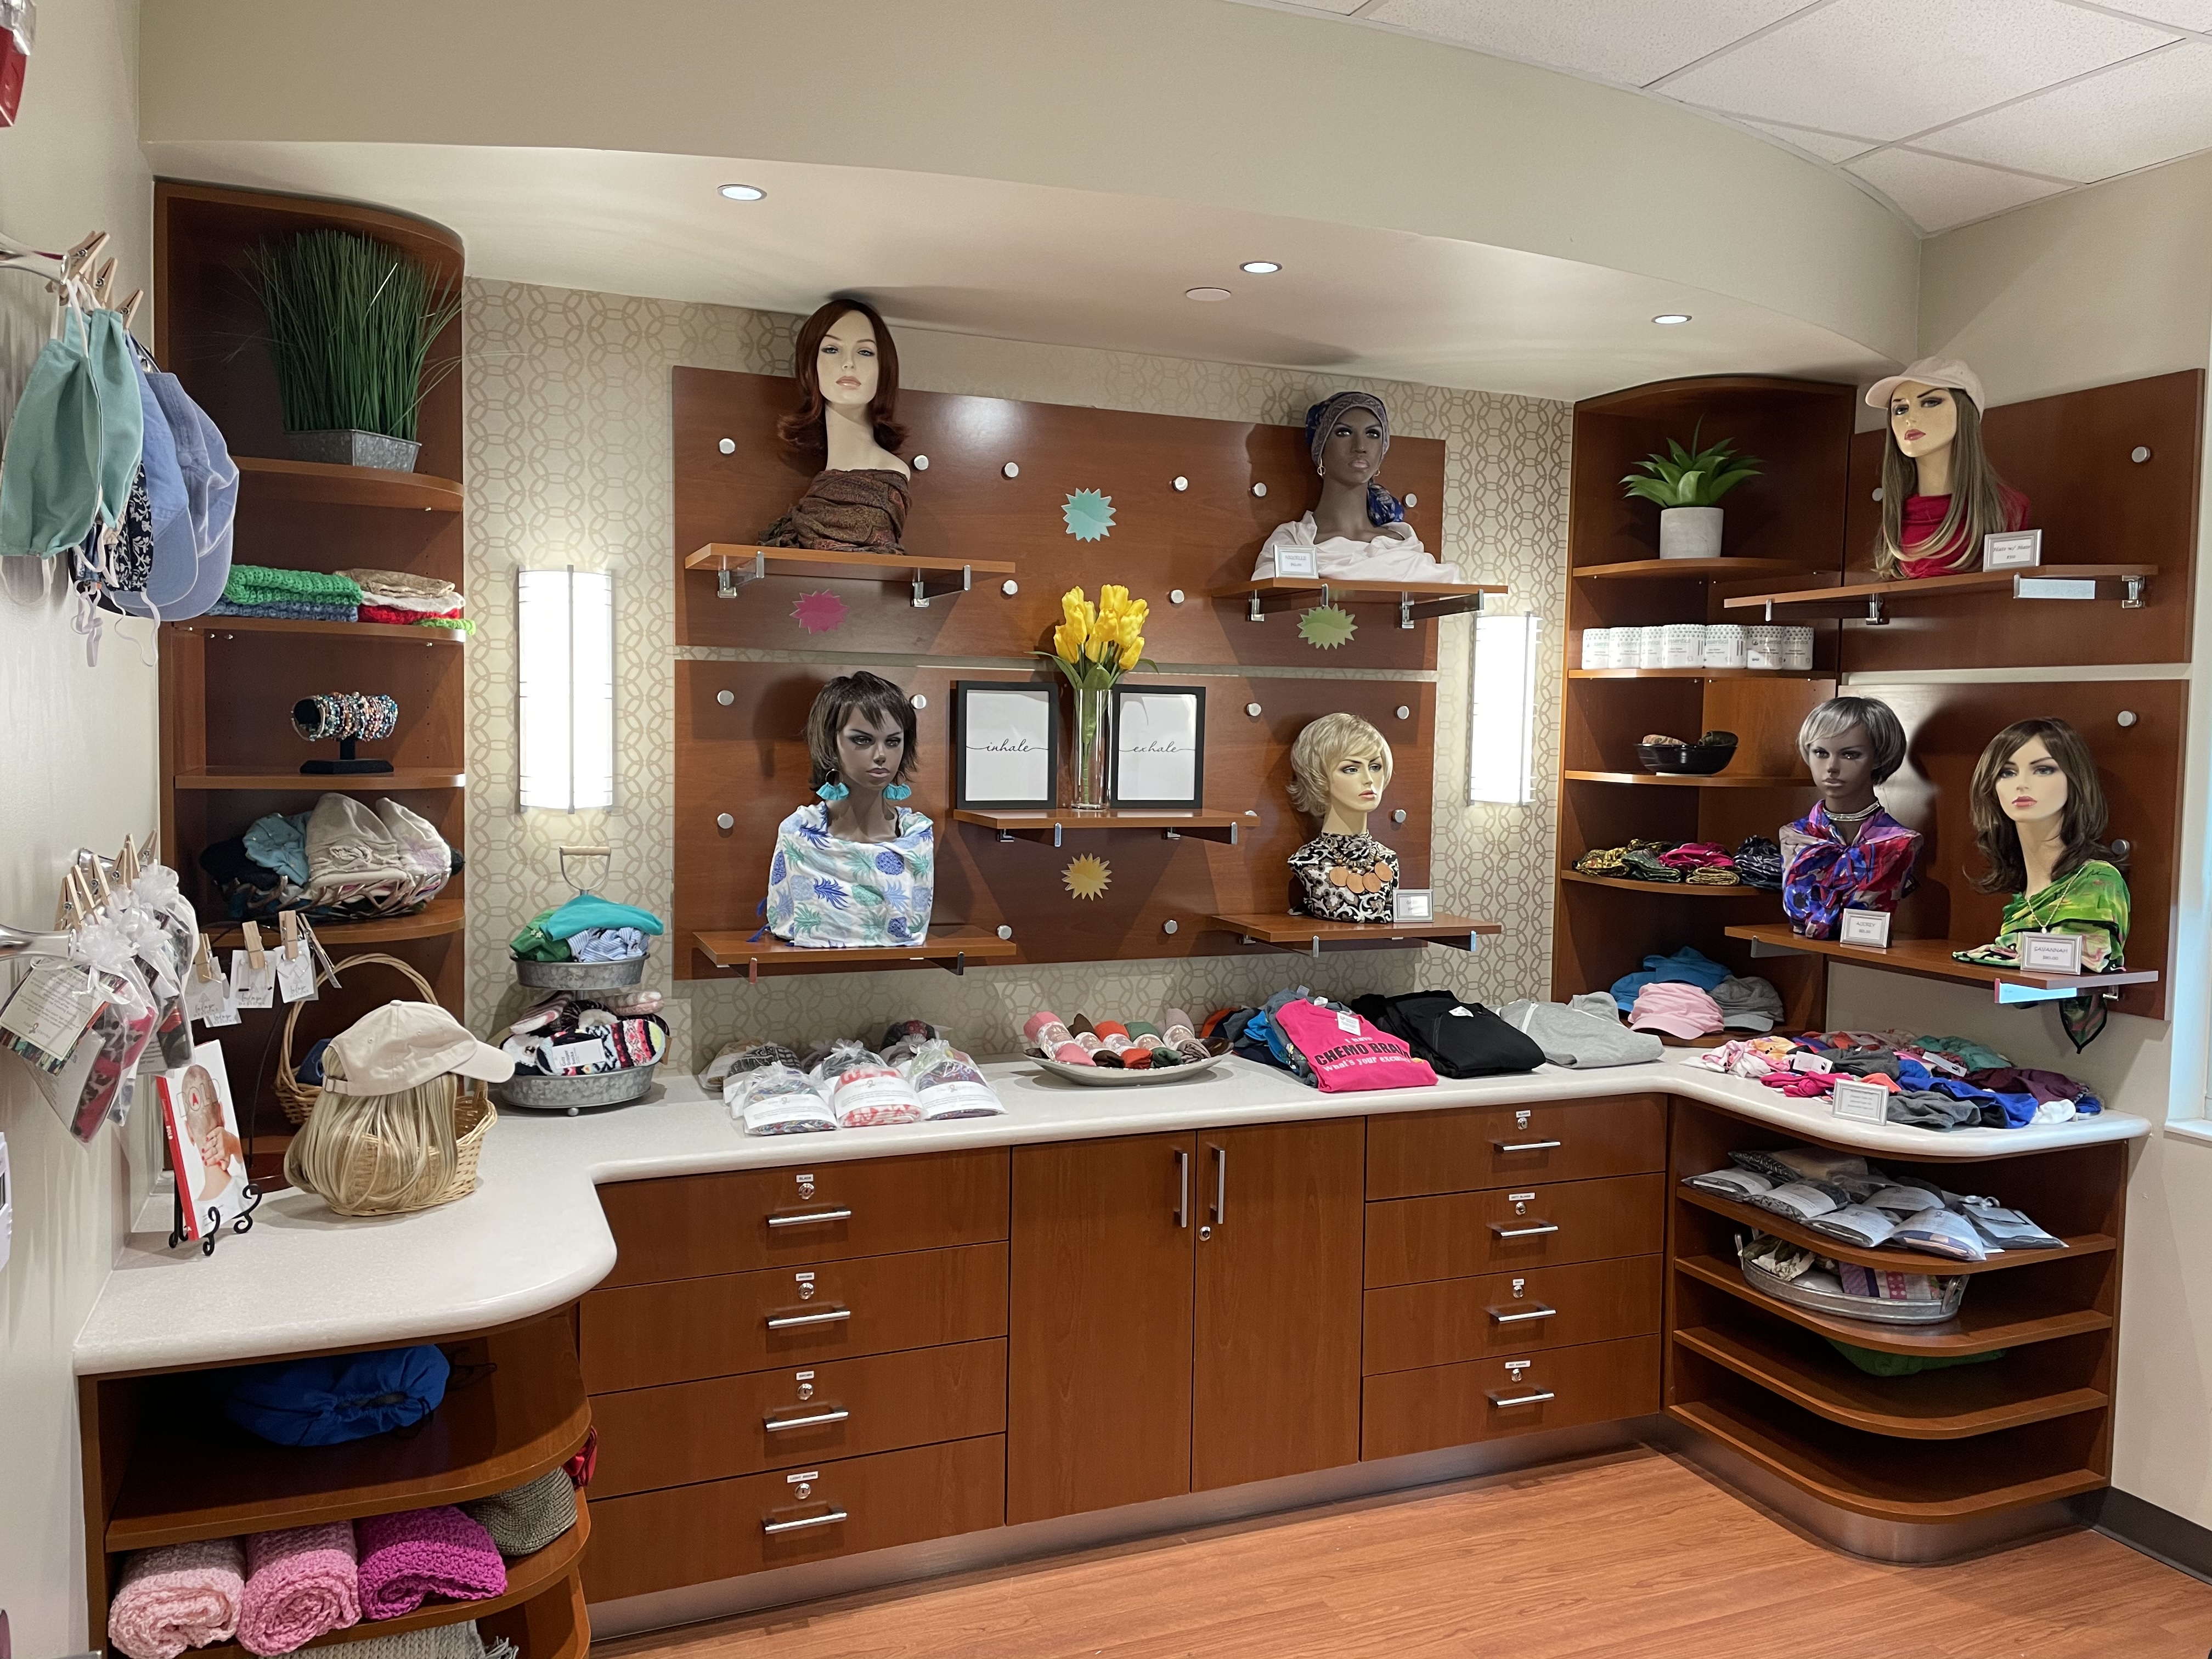 A boutique for wigs and other cancer care needs